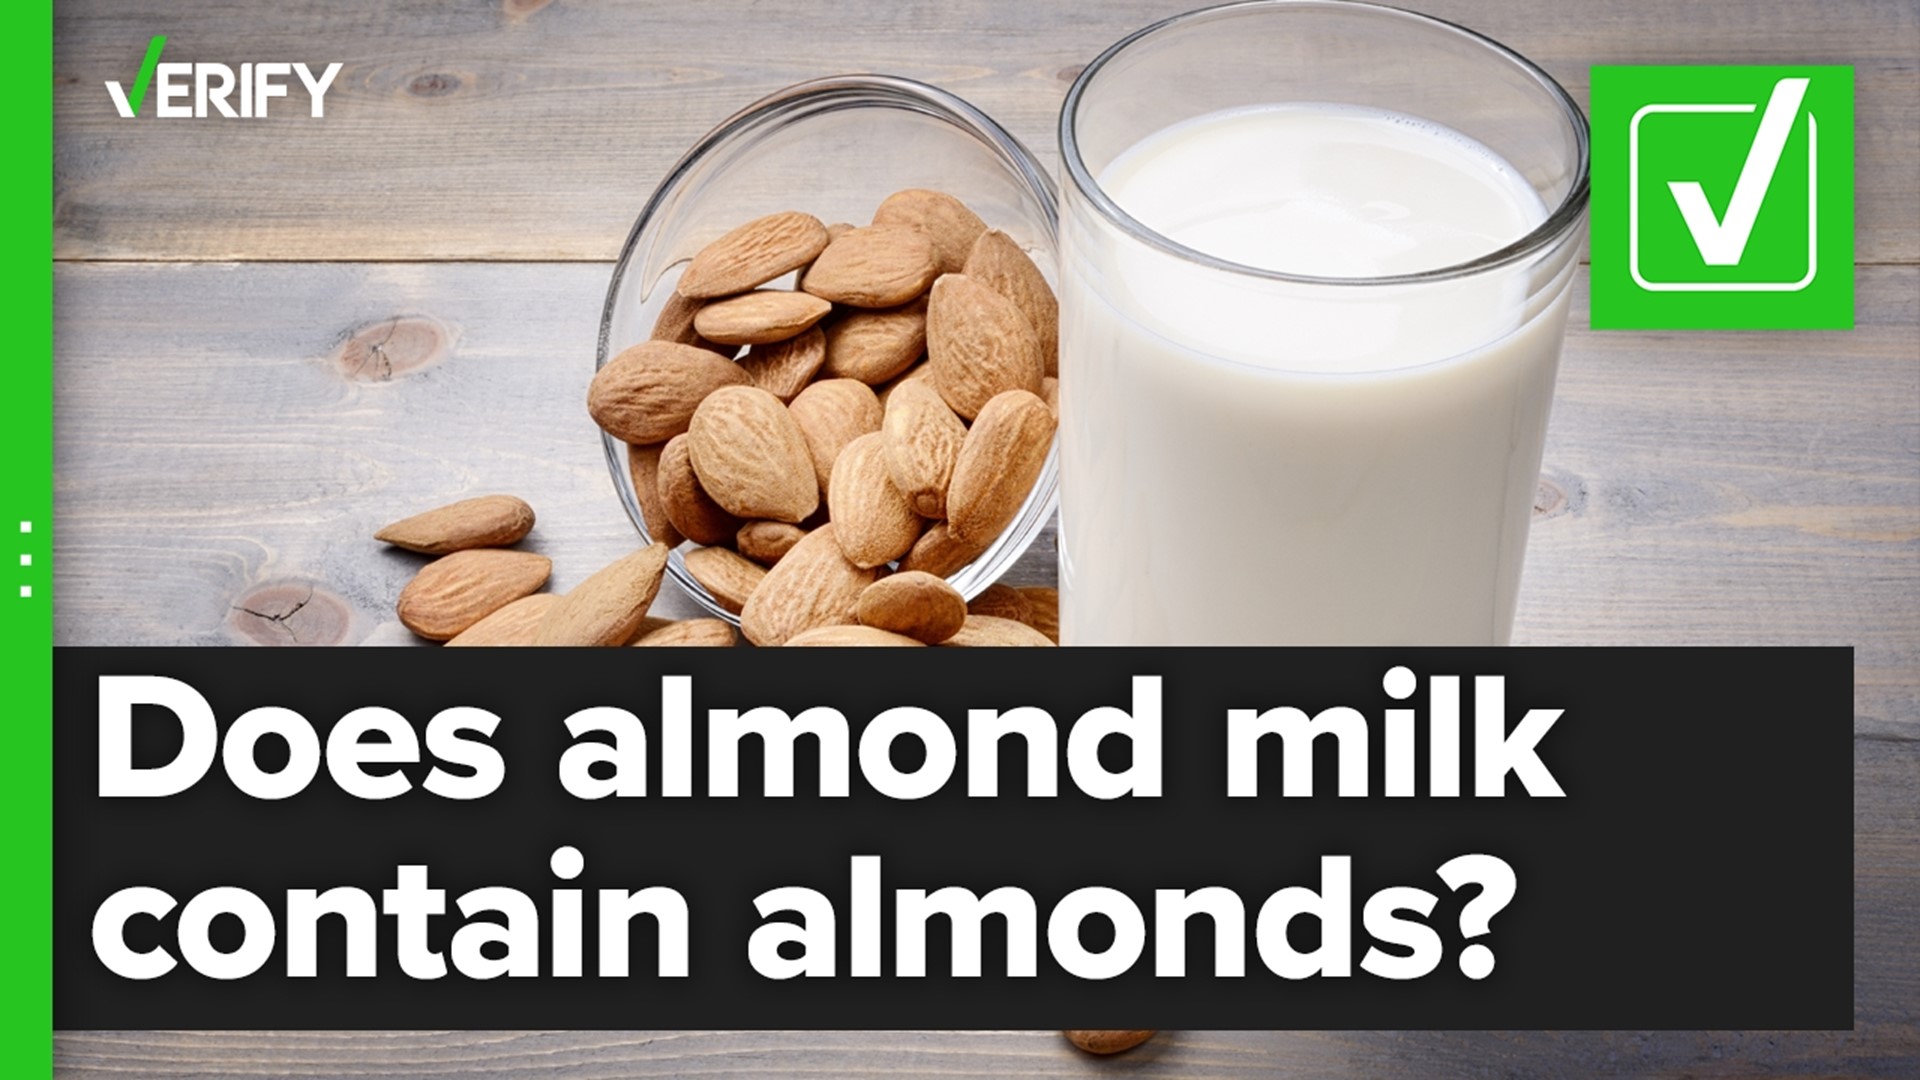 A TikTok video claims there are no almonds in popular almond milk brands. While the amount varies by brand, we can VERIFY they do contain almonds.